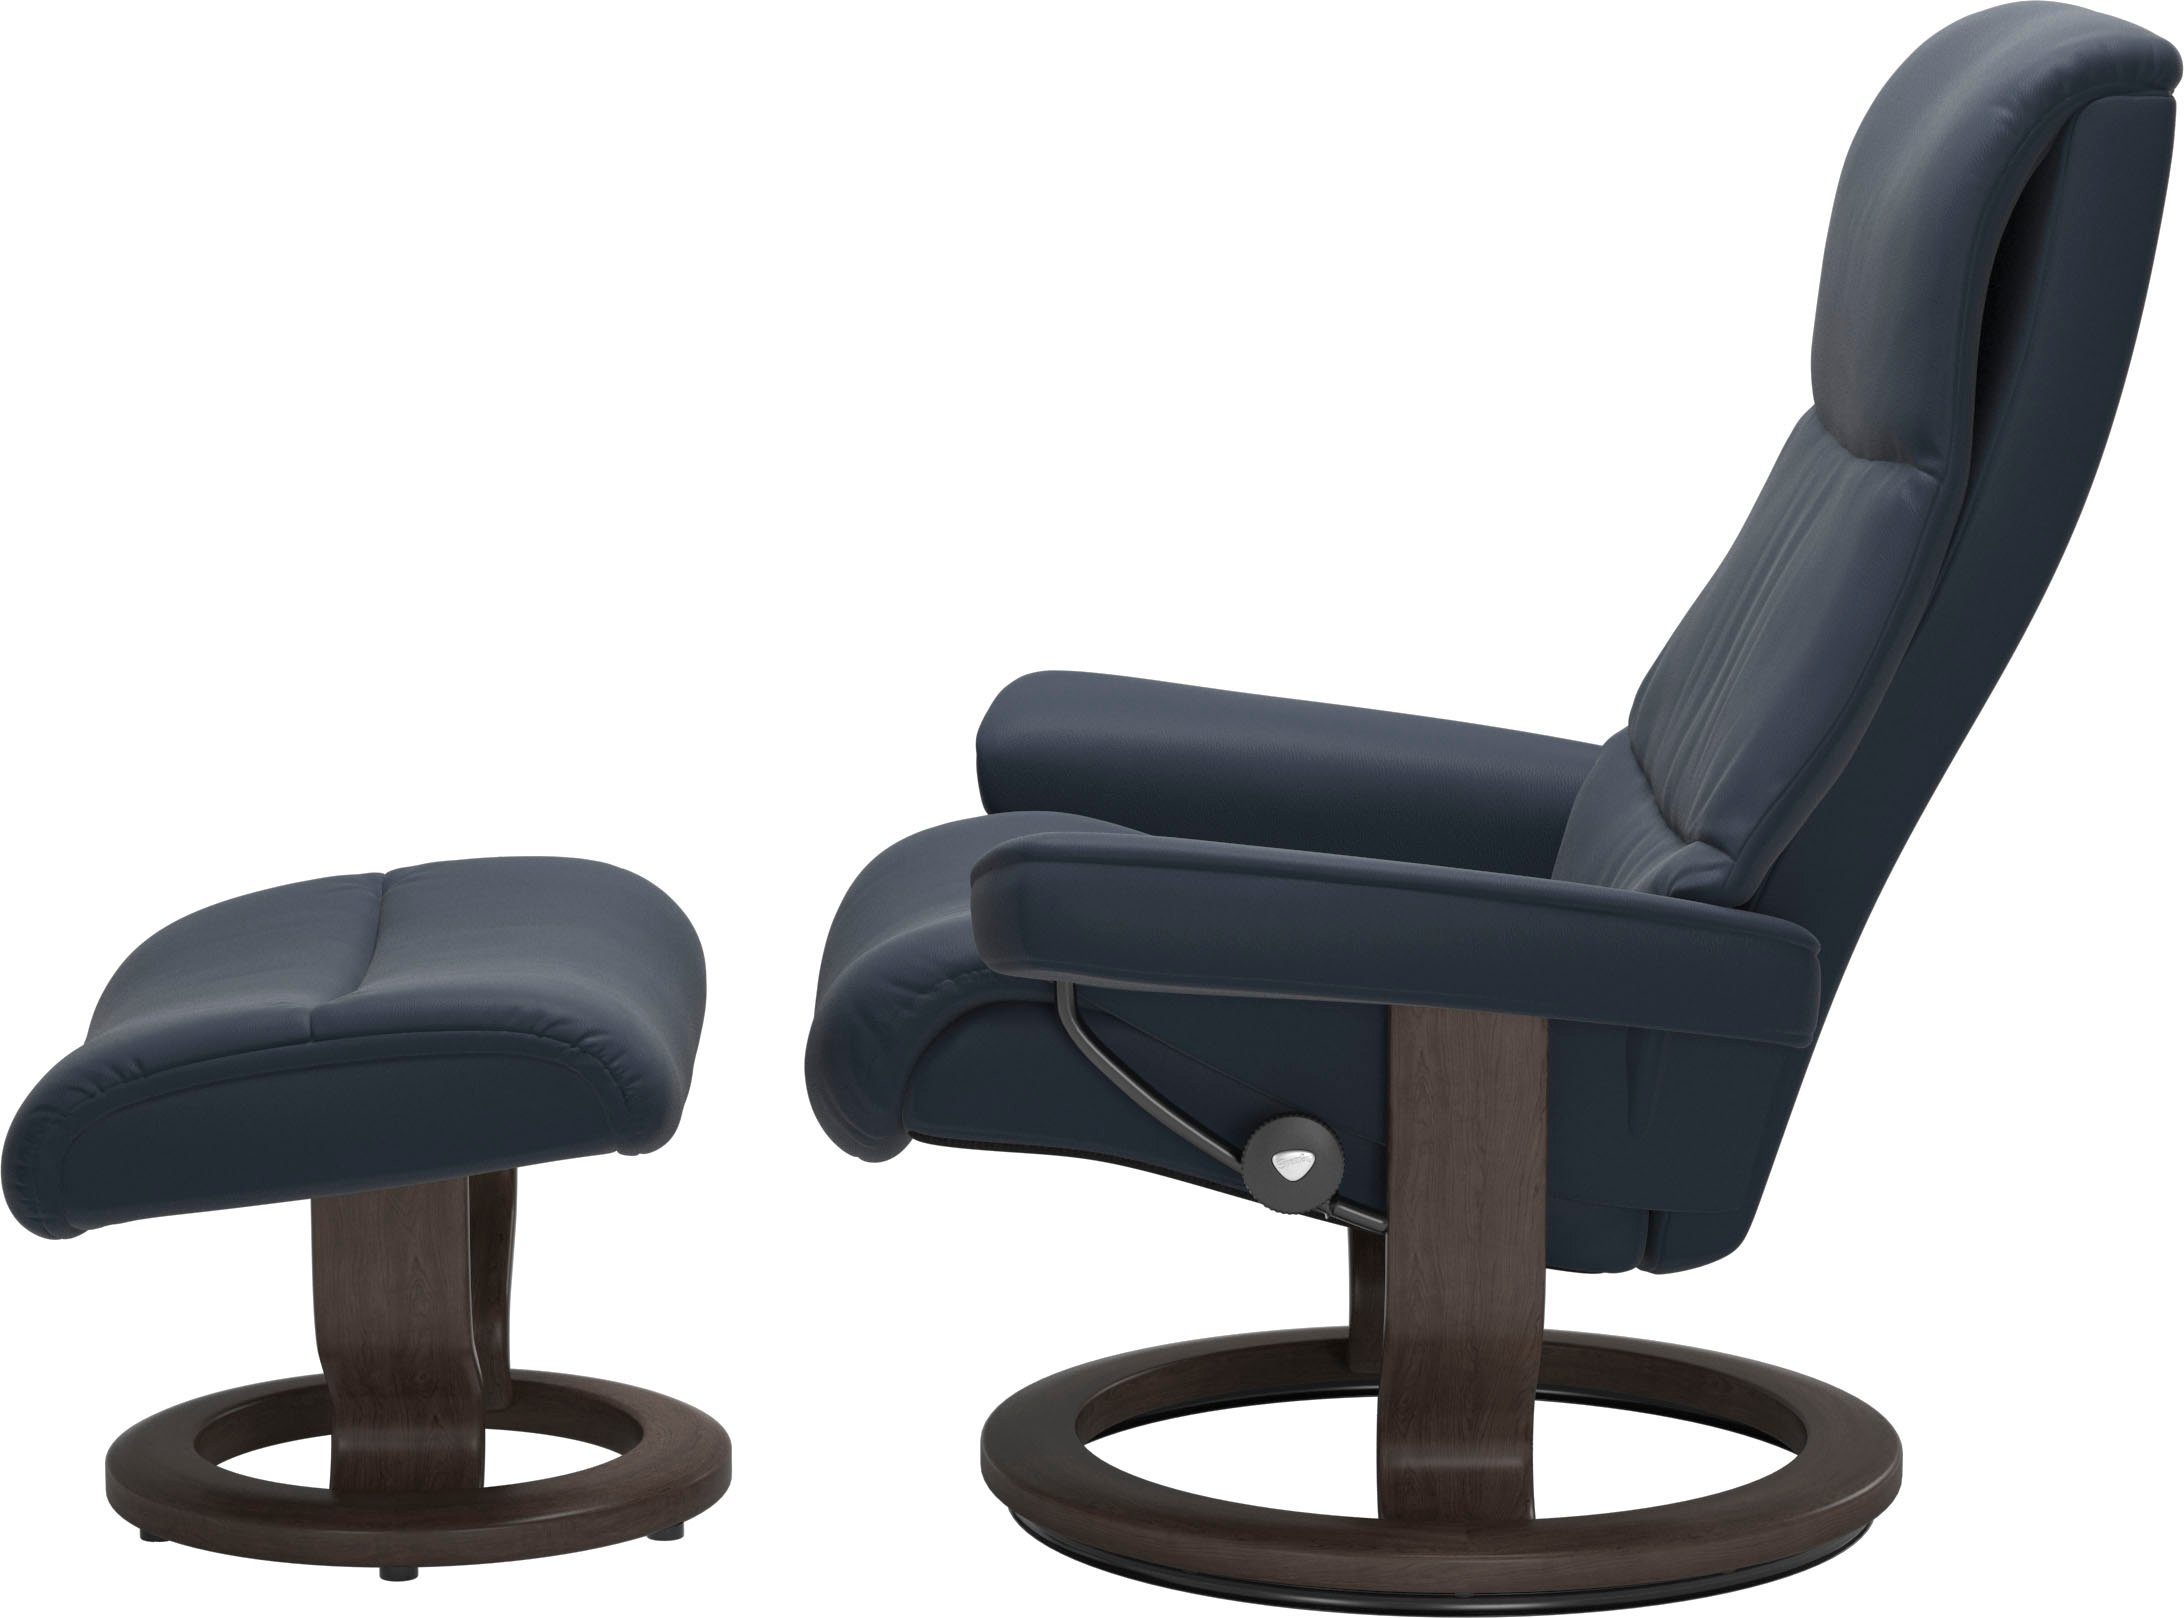 Stressless® Größe Classic M,Gestell mit Base, Wenge View, Relaxsessel